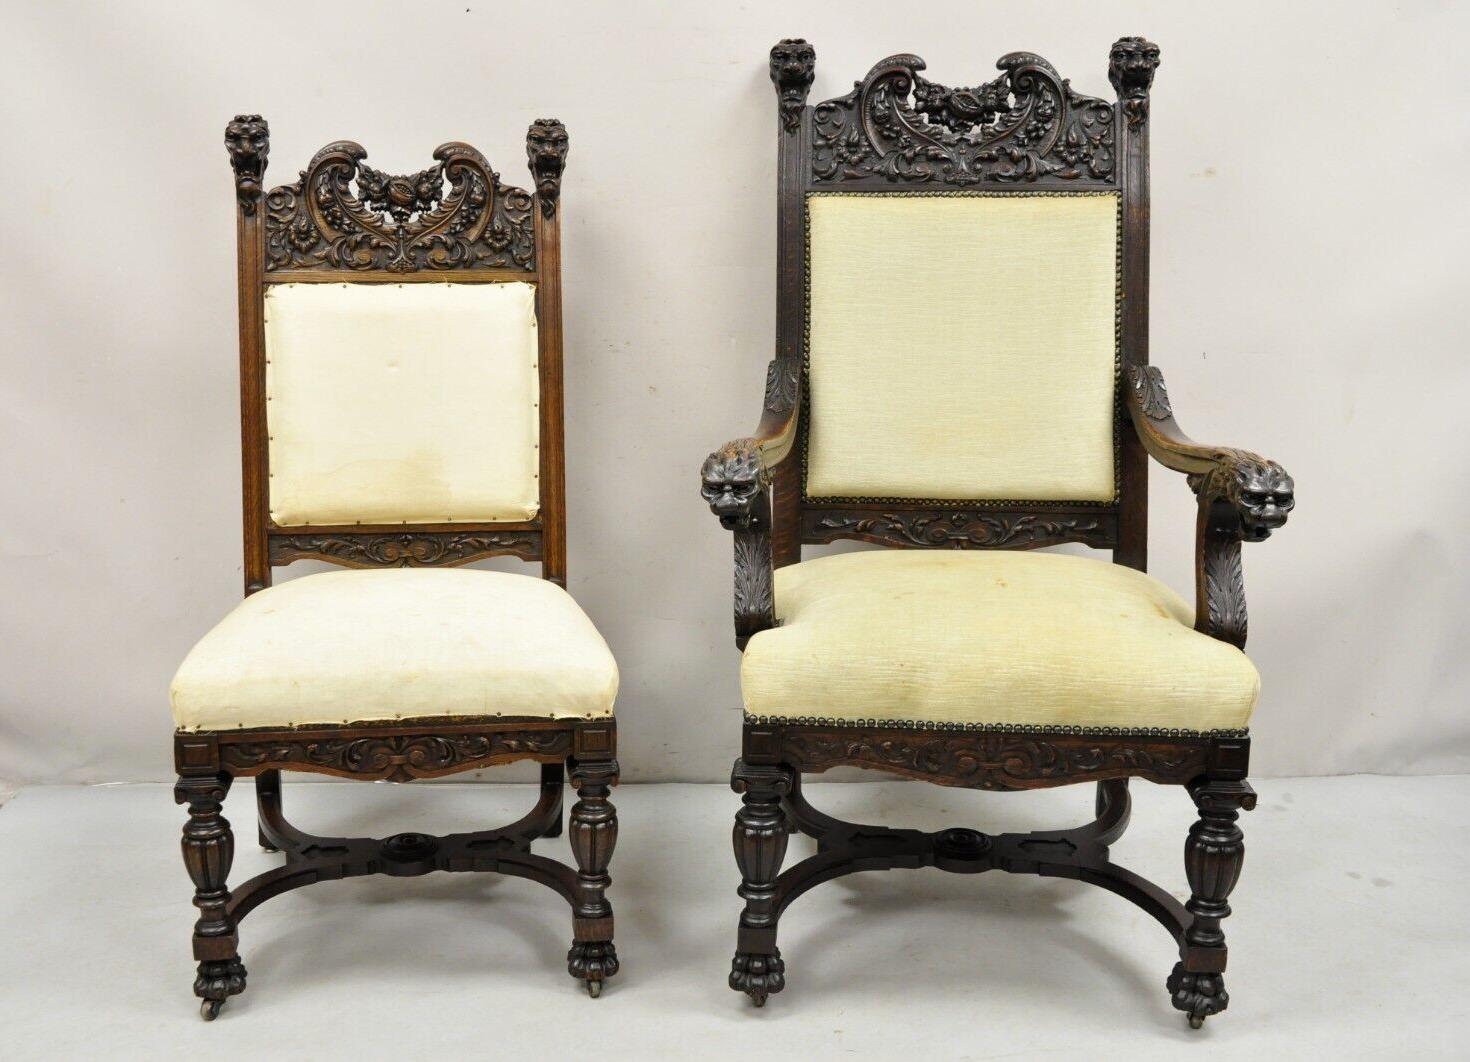 Antique Oak Renaissance Figural Lion Carved Dining Chairs attributed to R.J. Horner - Set of 6. Item features (2) Armchairs, (4) Side chairs, stunning solid oak wood carved frames featuring lion heads, paw feet, stretcher bases and other floral and